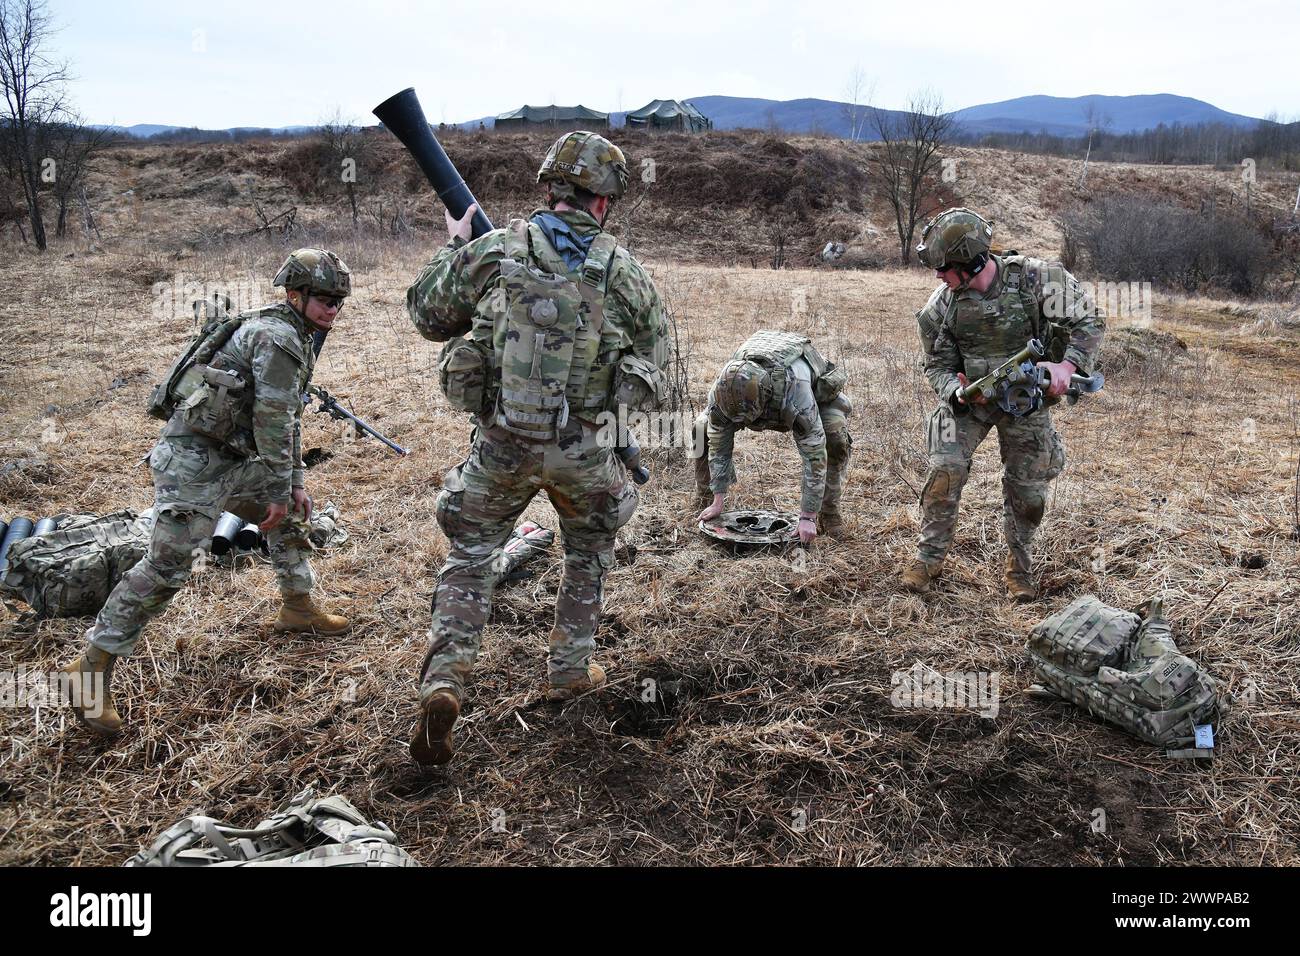 U.S. Army Paratroopers assigned to the 1st Battalion, 503rd Infantry Regiment, 173rd Airborne Brigade prepare an  M252 81 mm mortar system during Eagle Ursa exercise at the training range in Slunj, Croatia, Feb. 24, 2024. The 173rd Airborne Brigade is the U.S. Army's Contingency Response Force in Europe, providing rapidly deployable forces to the United States European, African, and Central Command areas of responsibility. Forward deployed across Italy and Germany, the brigade routinely trains alongside NATO allies and partners to build partnerships and strengthen the alliance.  Army Stock Photo